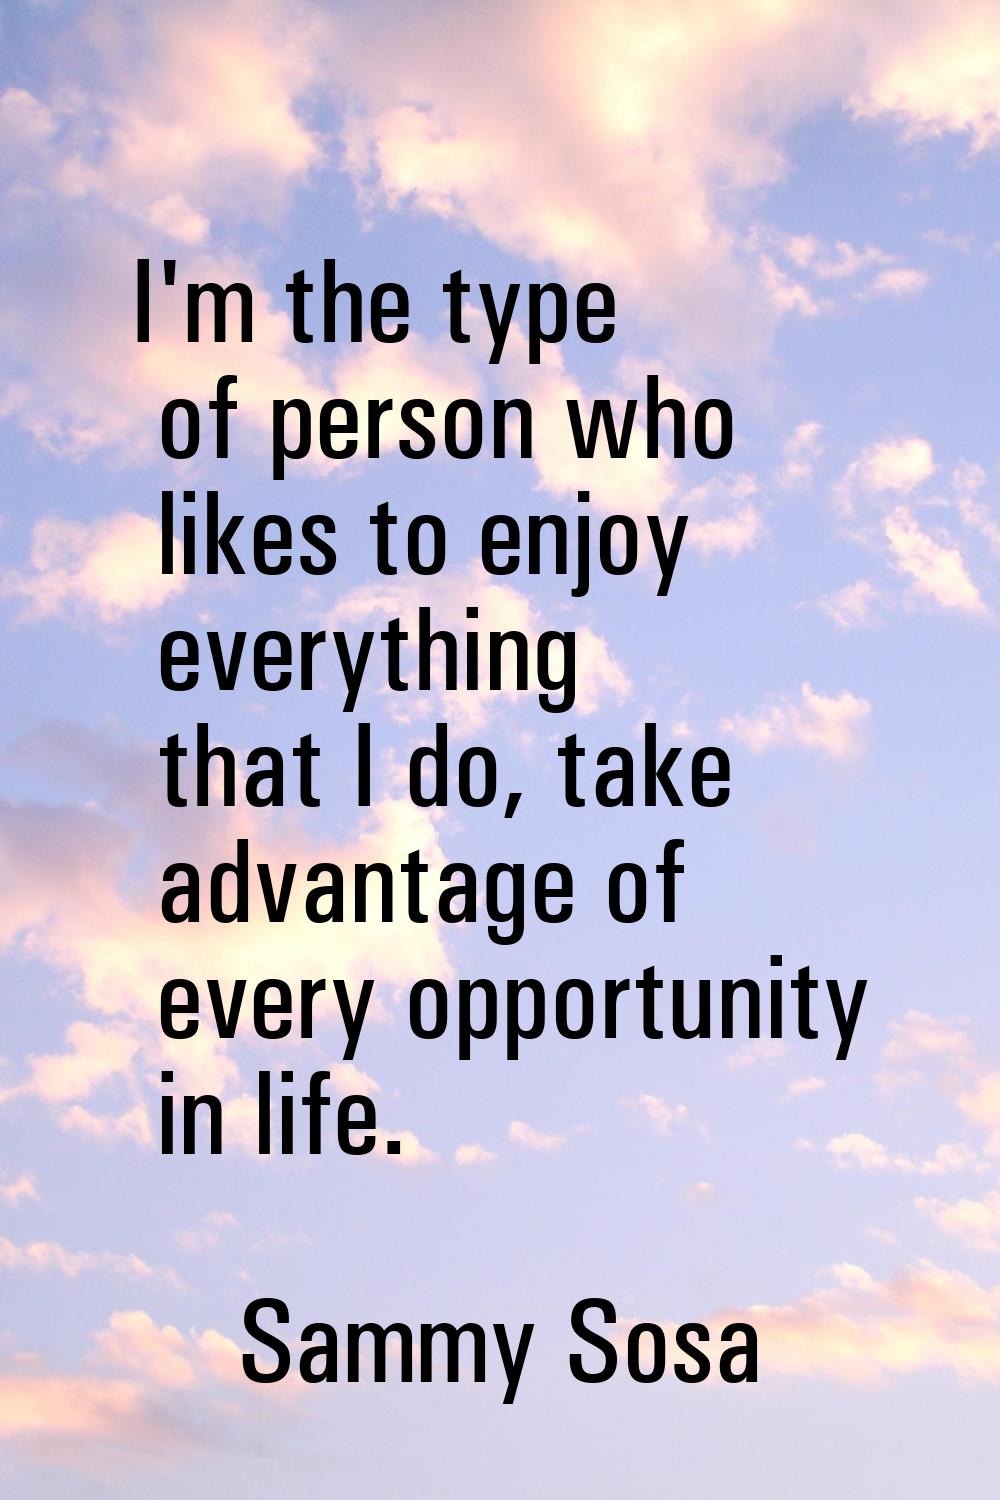 I'm the type of person who likes to enjoy everything that I do, take advantage of every opportunity